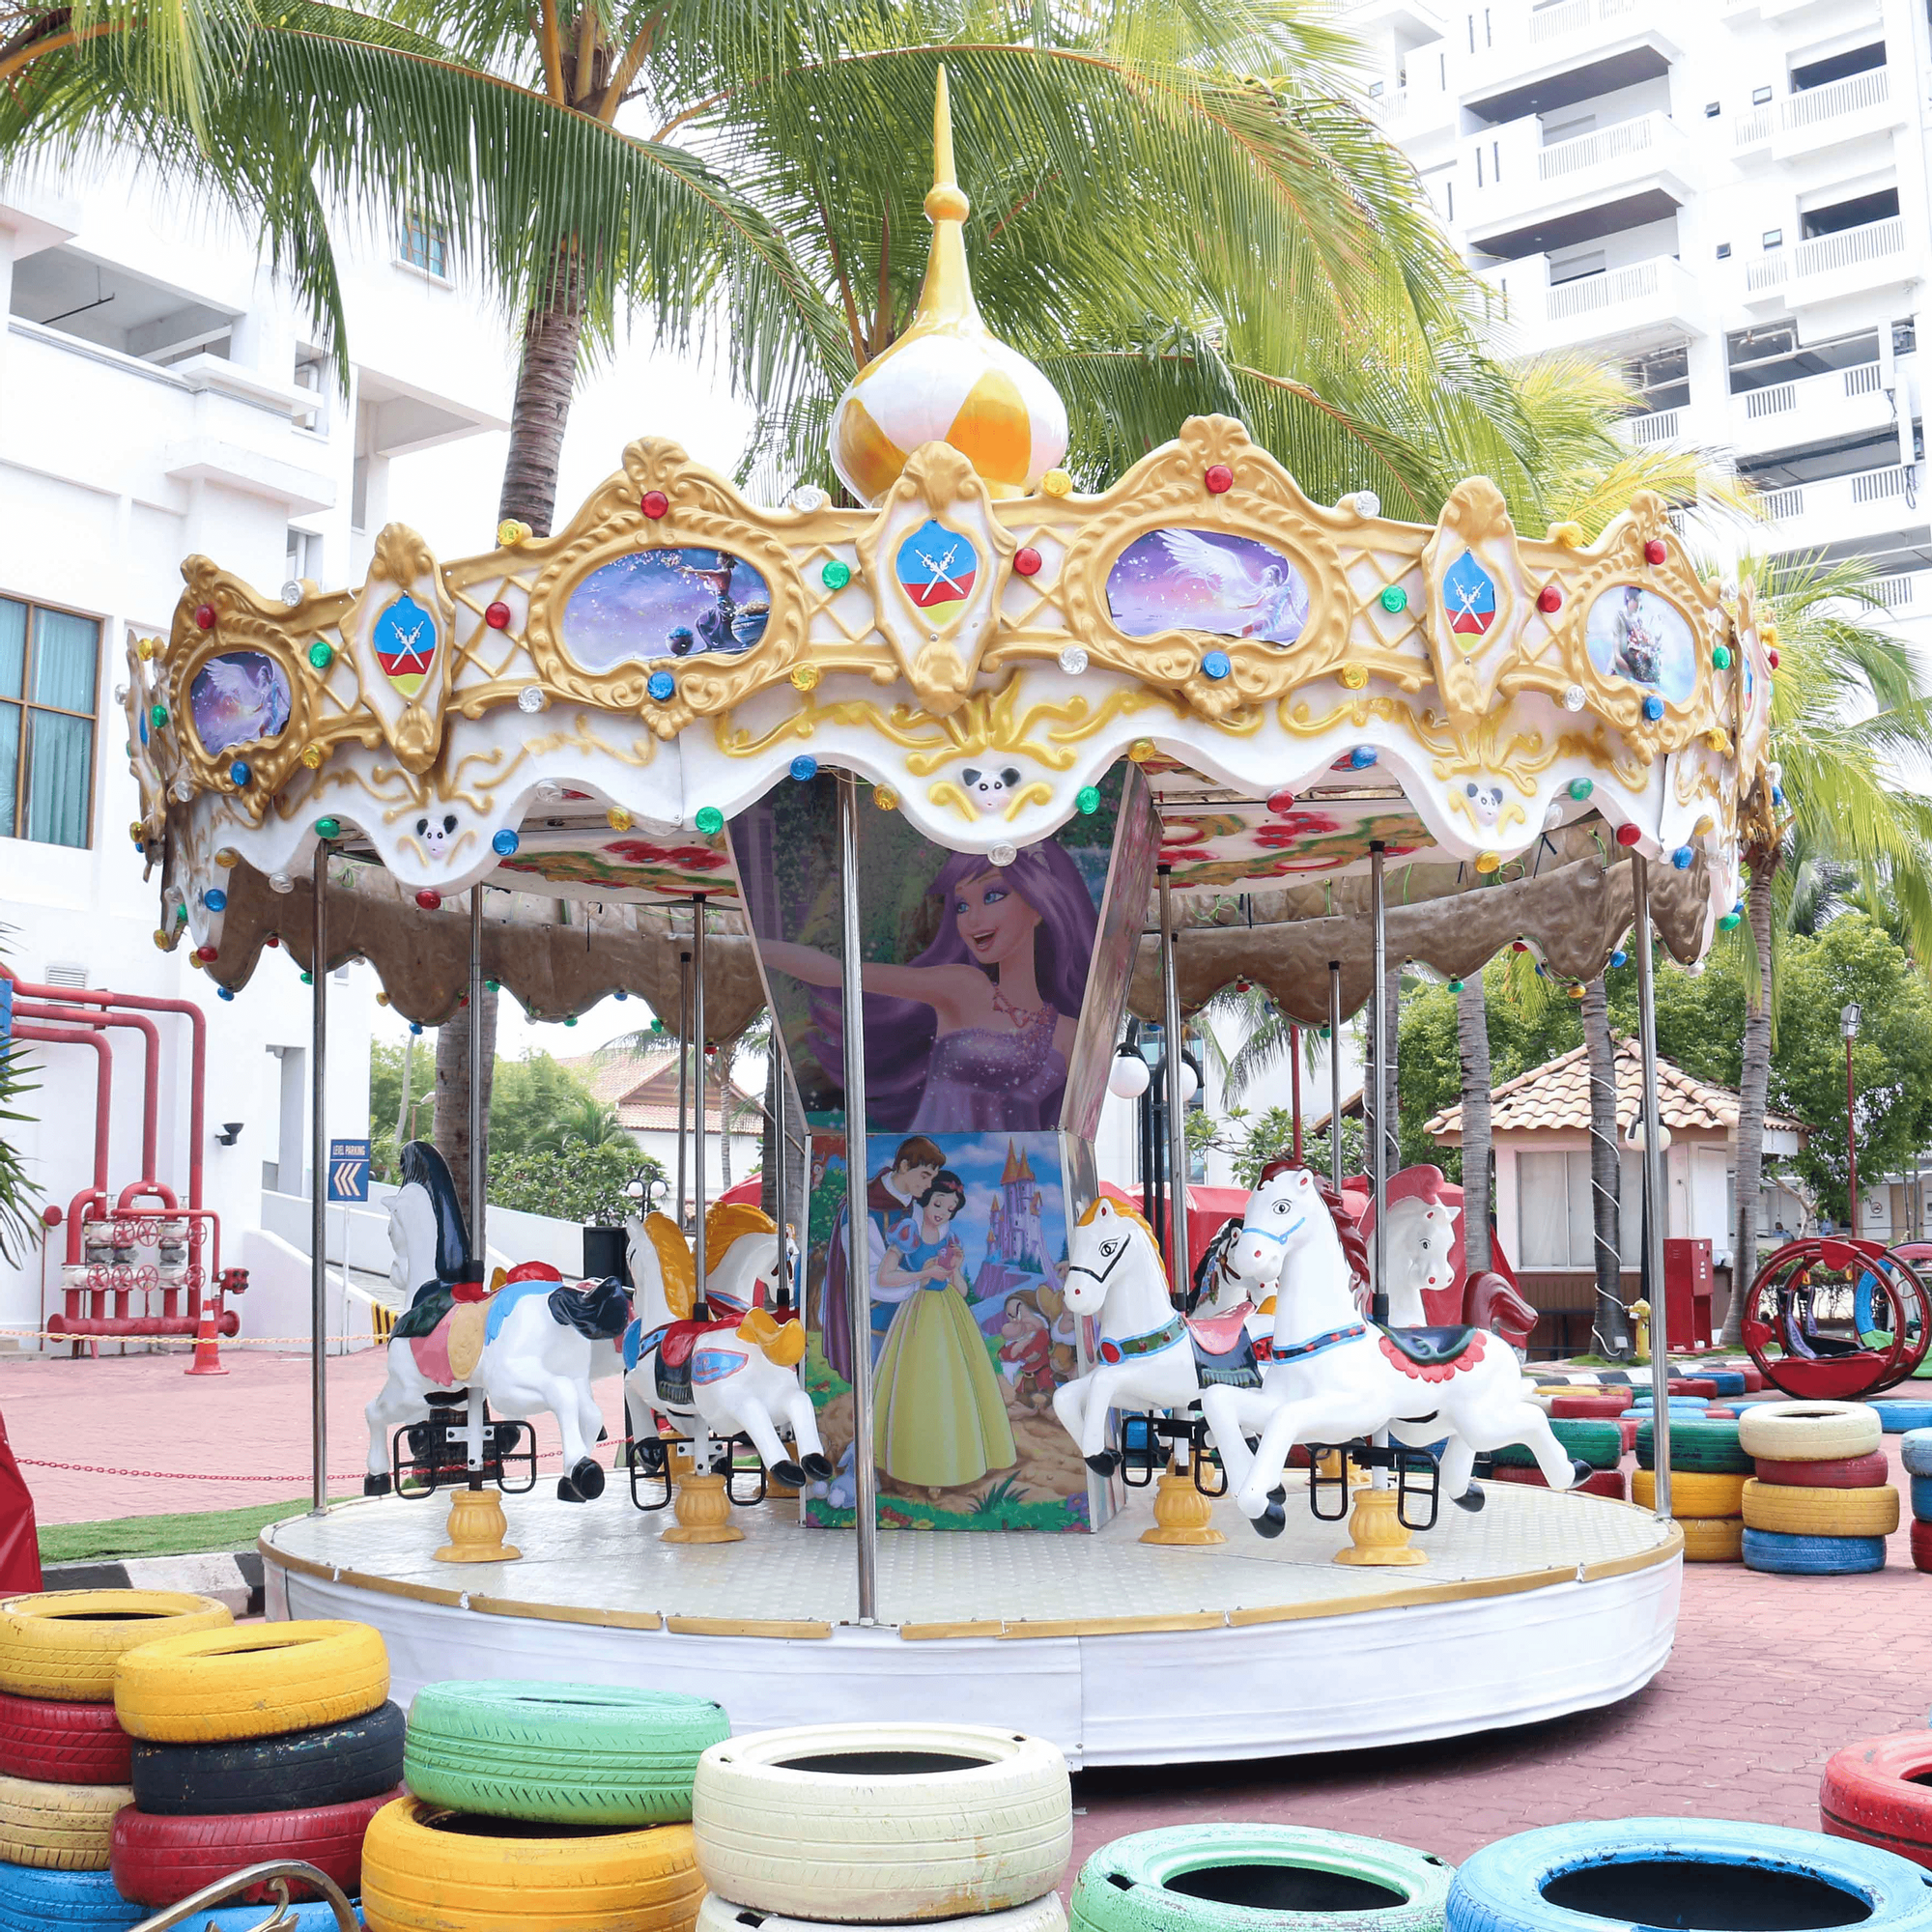 Fairy tale-themed merry-go-round for children at Lexis PD